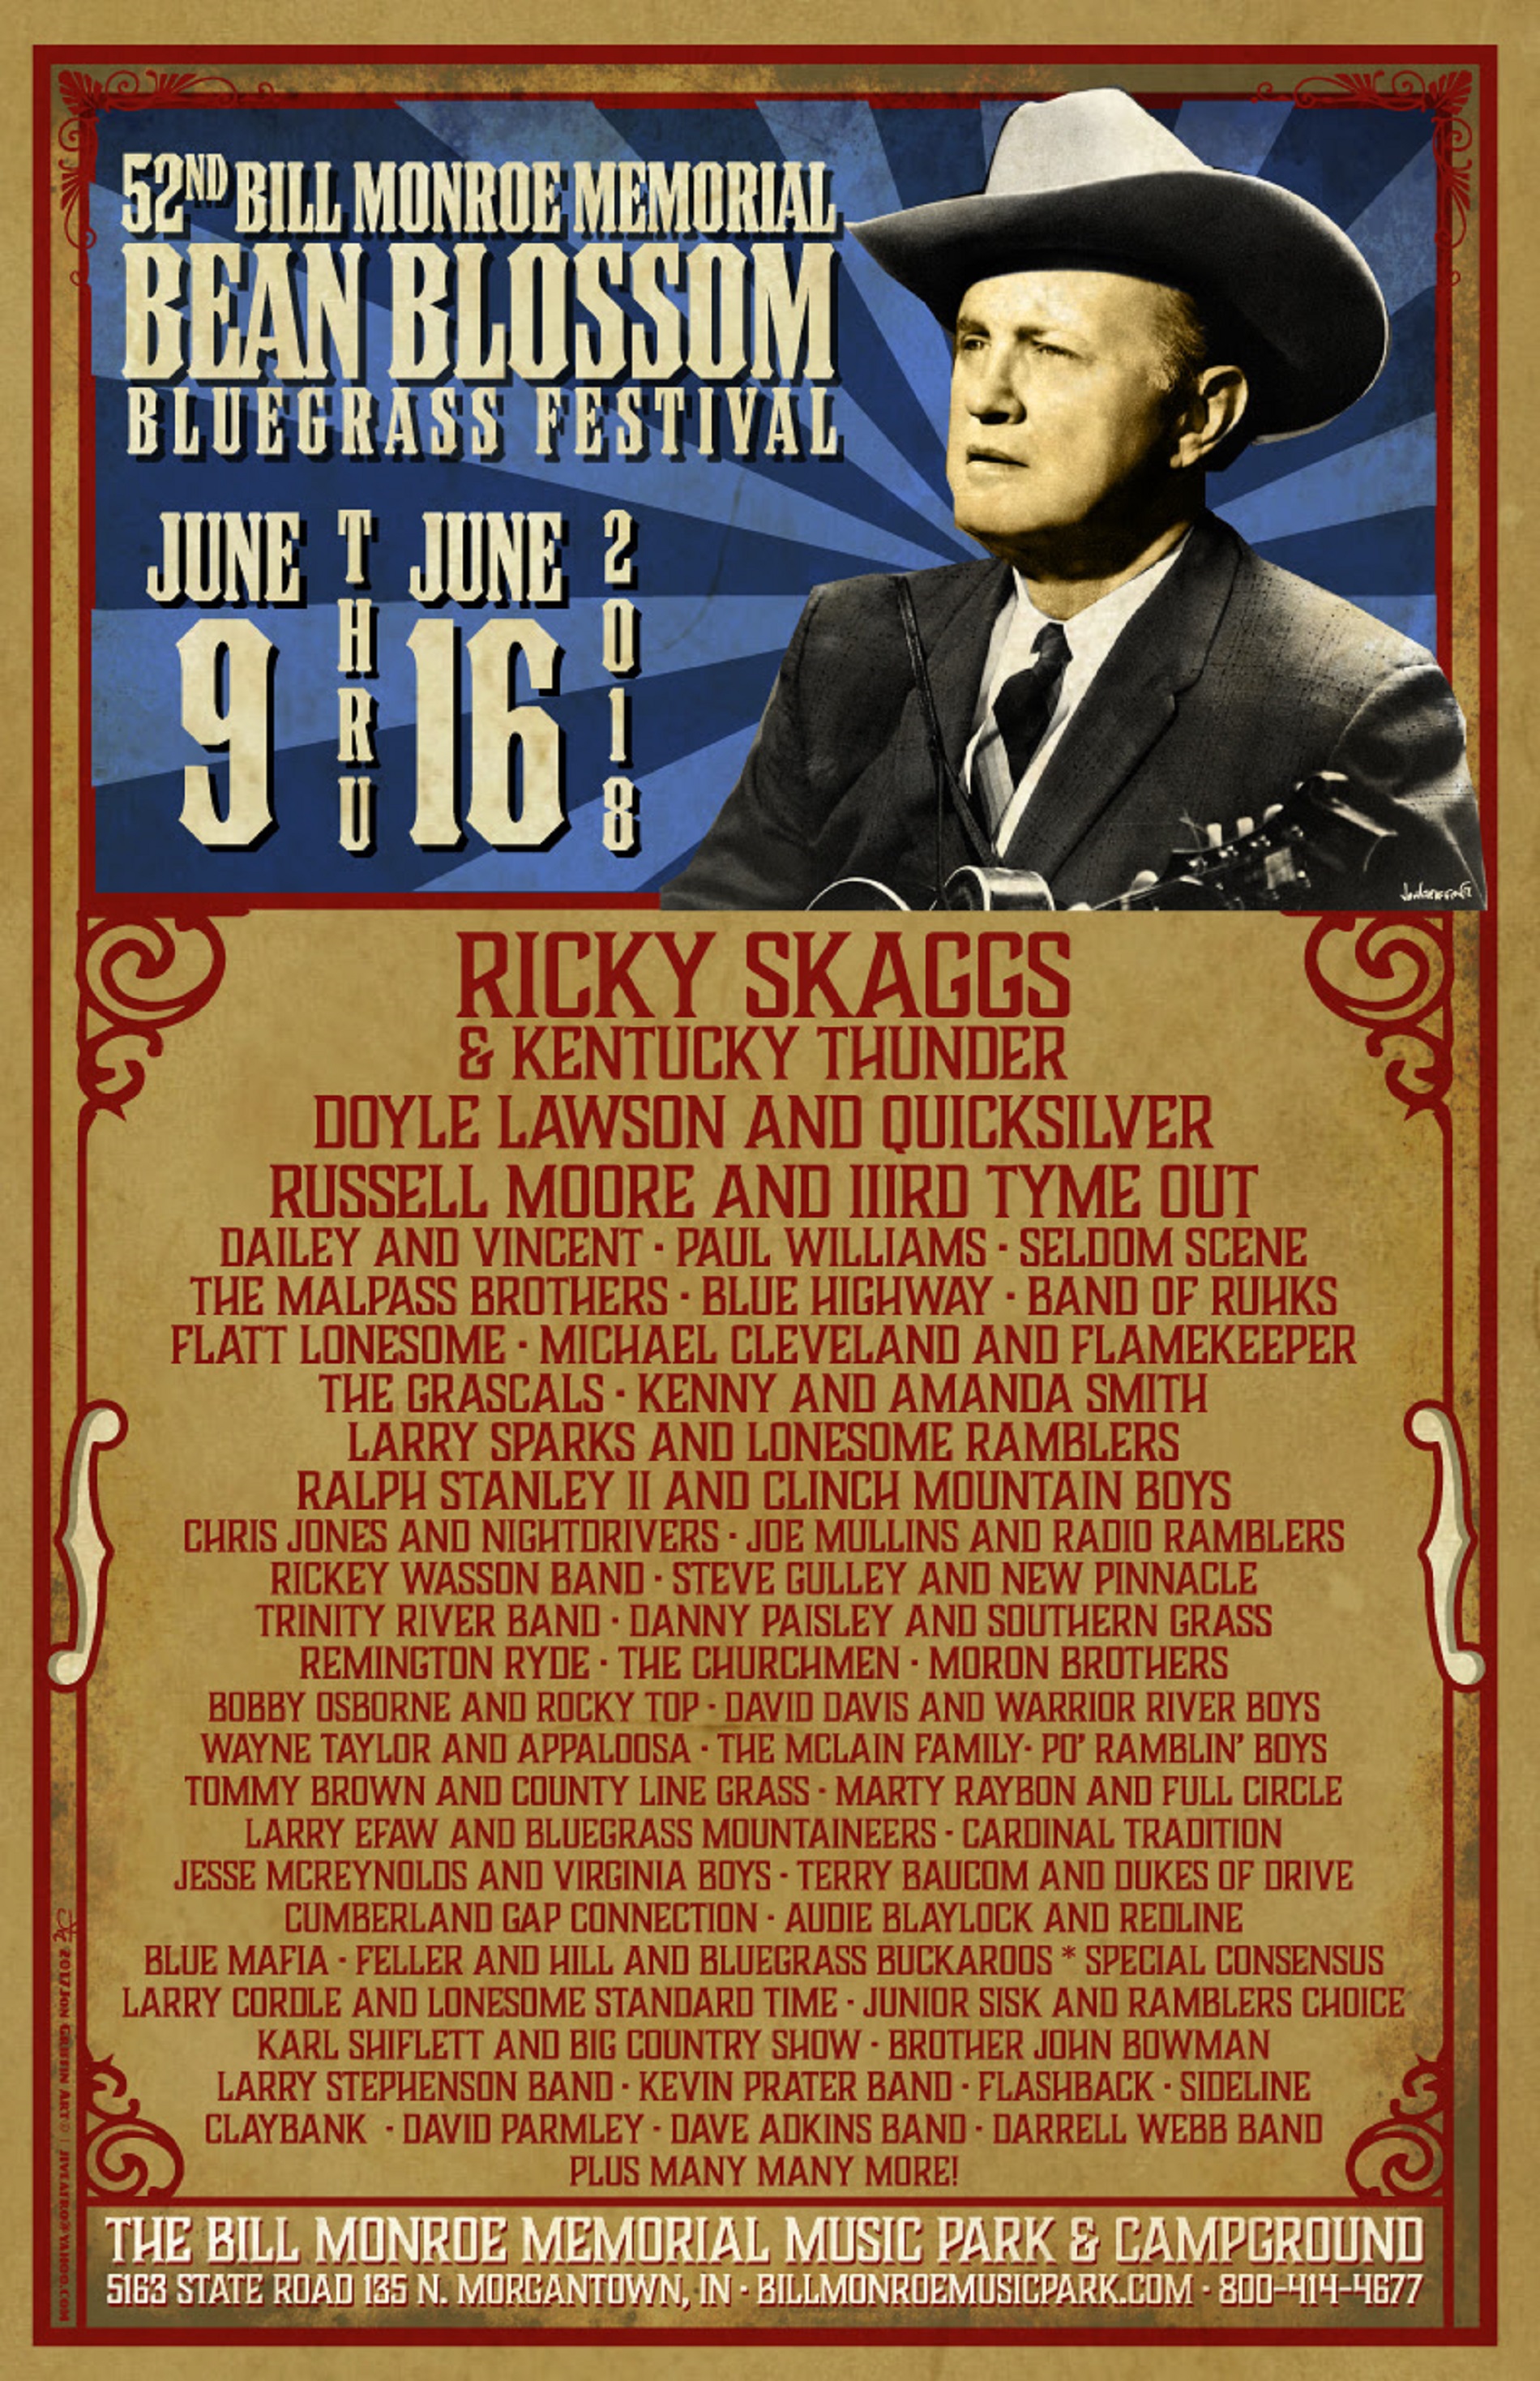 Bean Blossom Line-Up Includes Ricky Skaggs, Asleep at the Wheel & more!